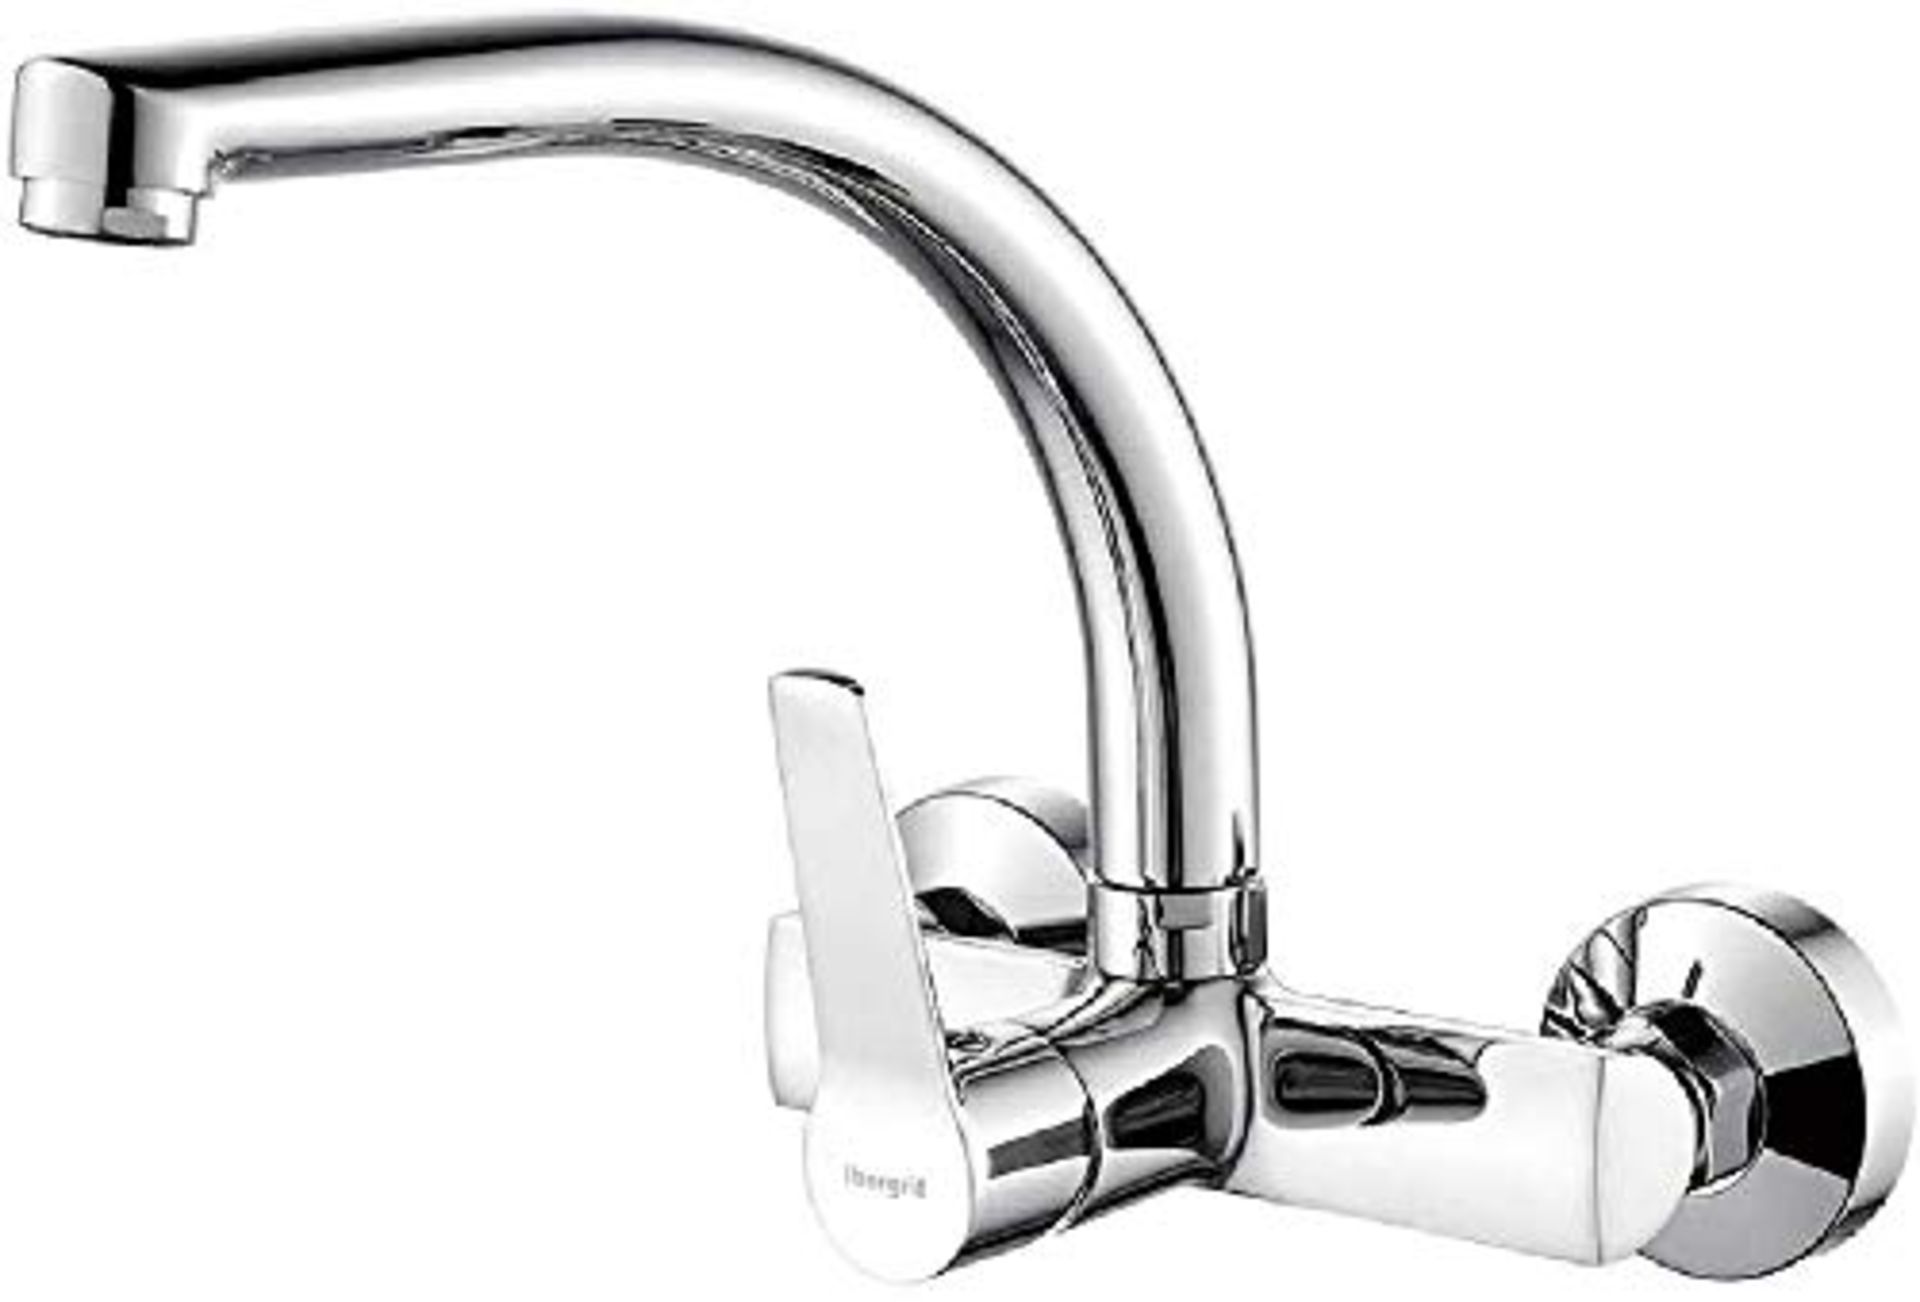 Ibergrif Arial, Wall Mounted Kitchen Tap, Sink Mixer with 360 Â° Swiveling Spout, Ch